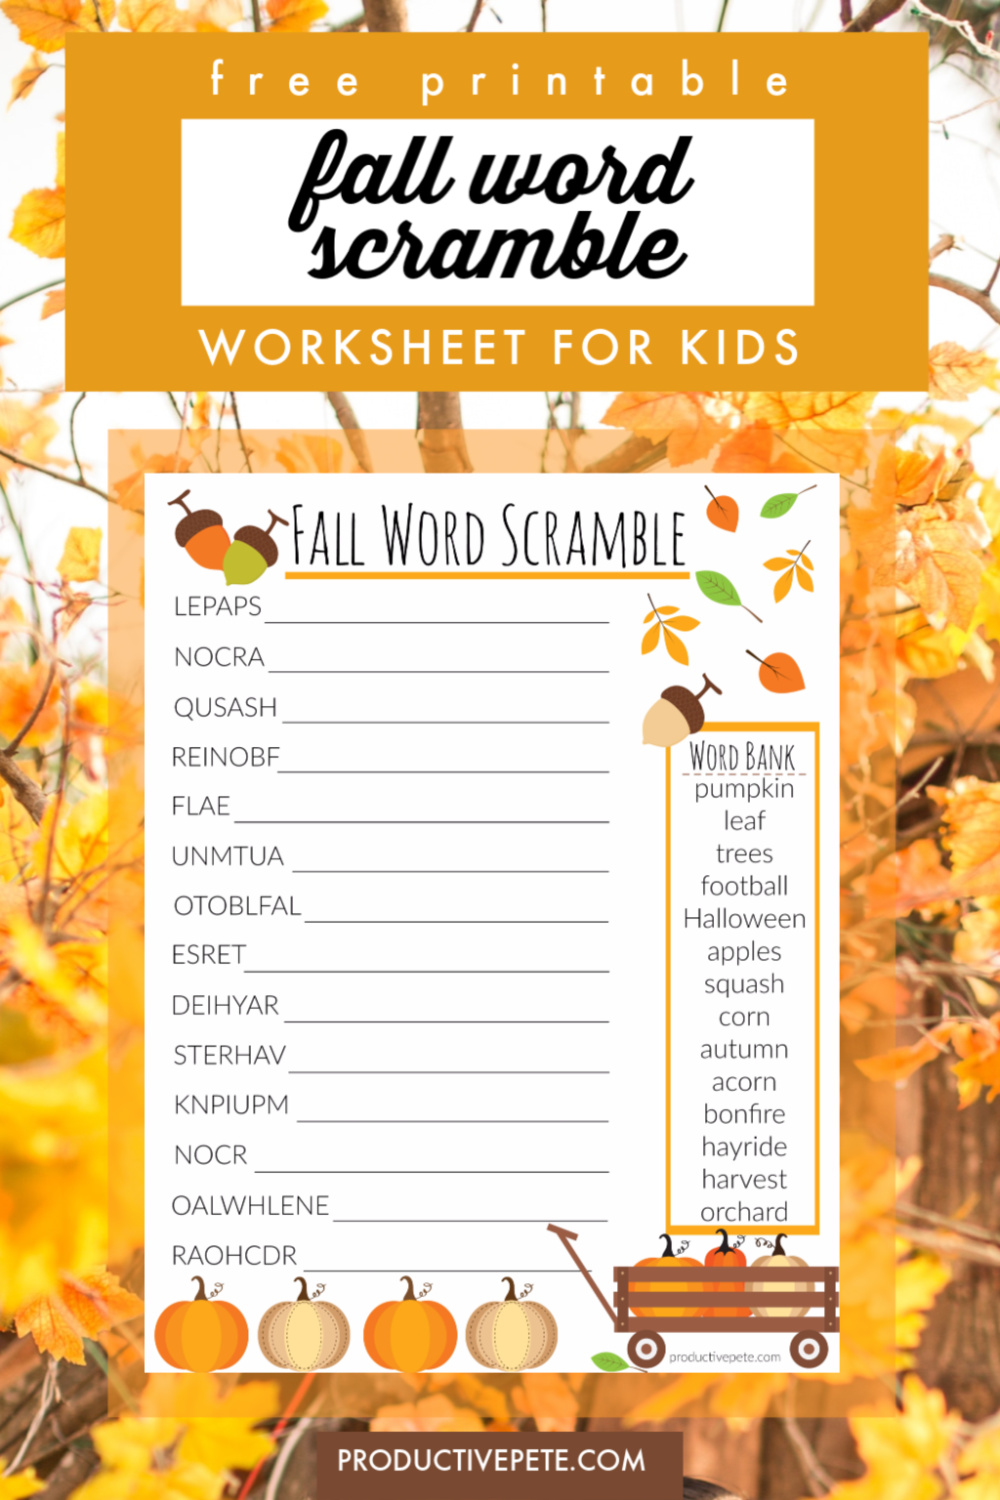 free-printable-unscramble-words-worksheets-learning-how-to-read